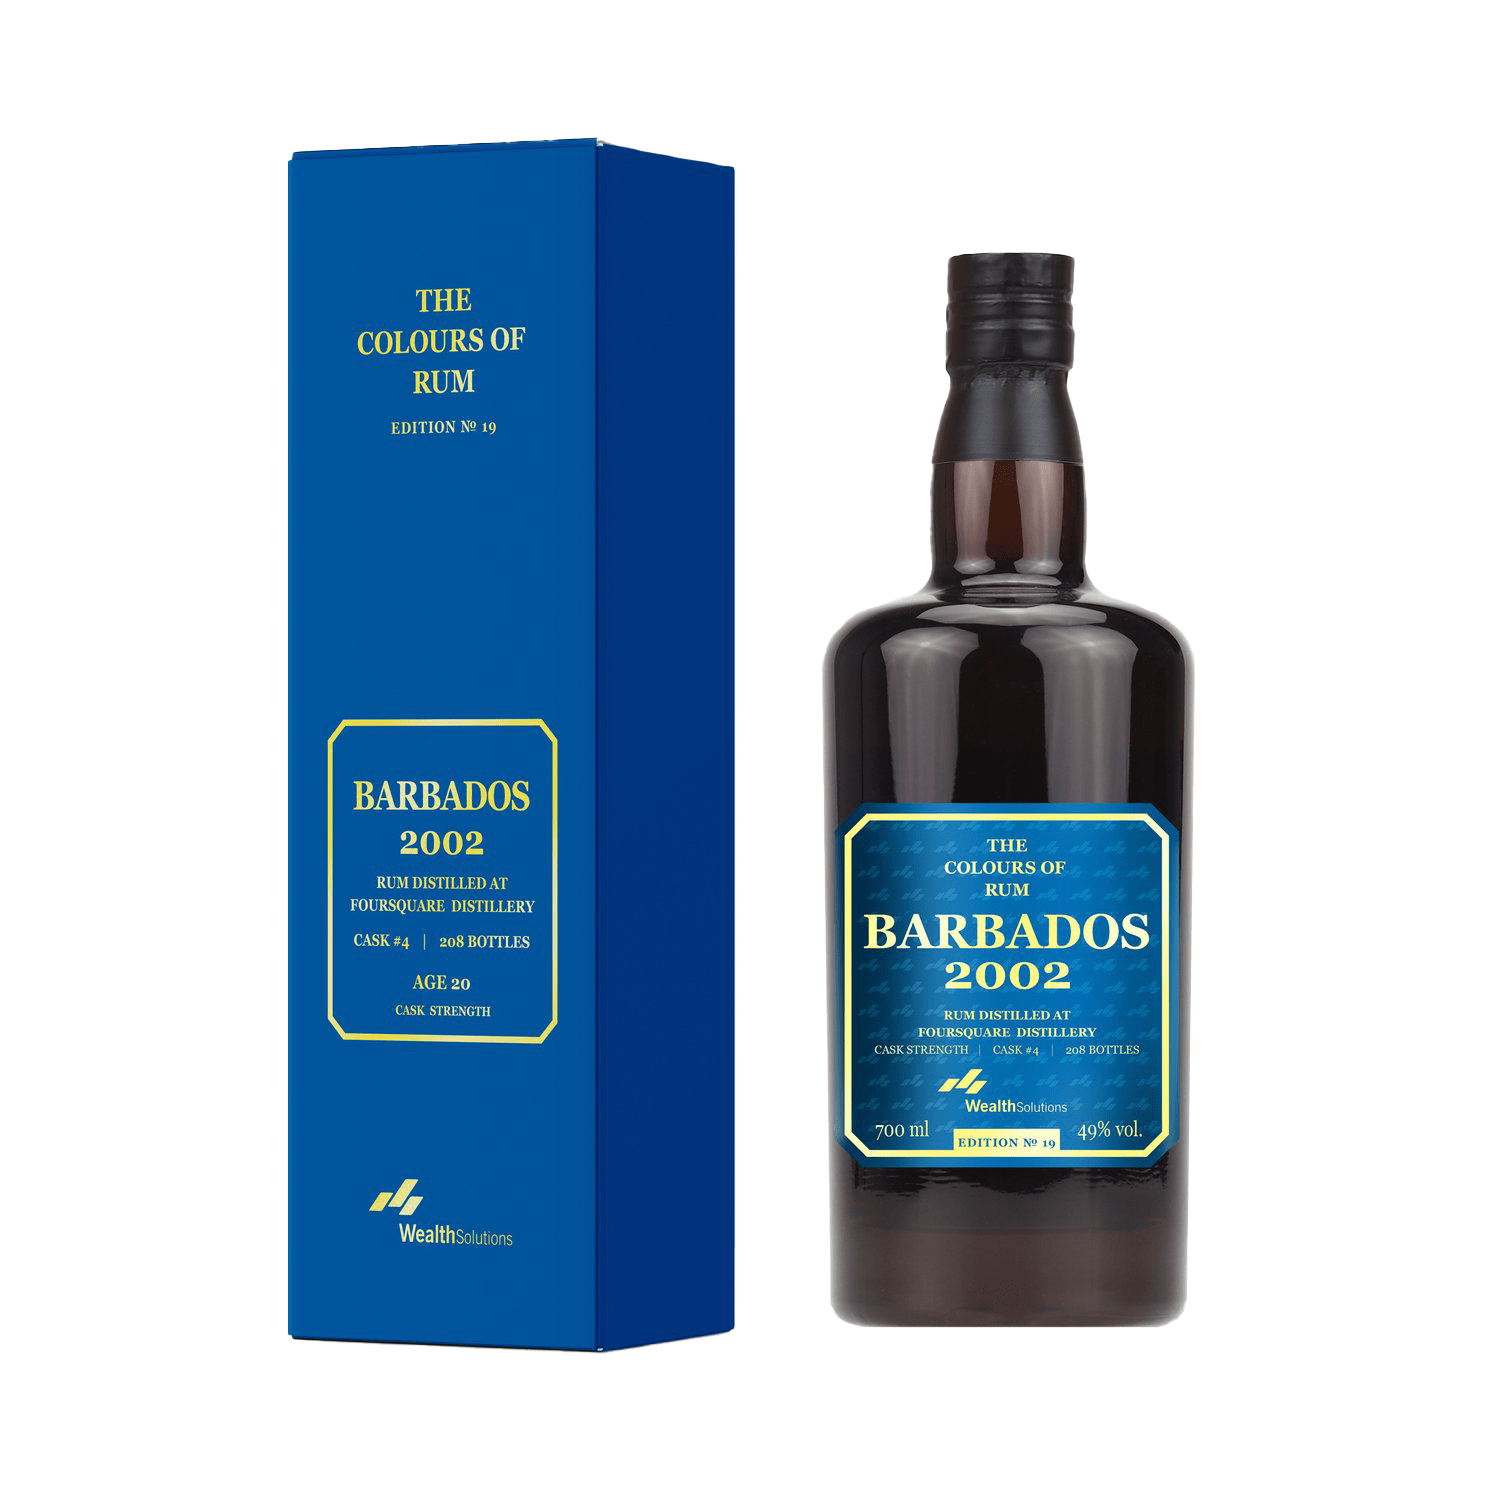 The Colours of Rum Edition No. 19, Barbados Foursquare 2002, GIFT